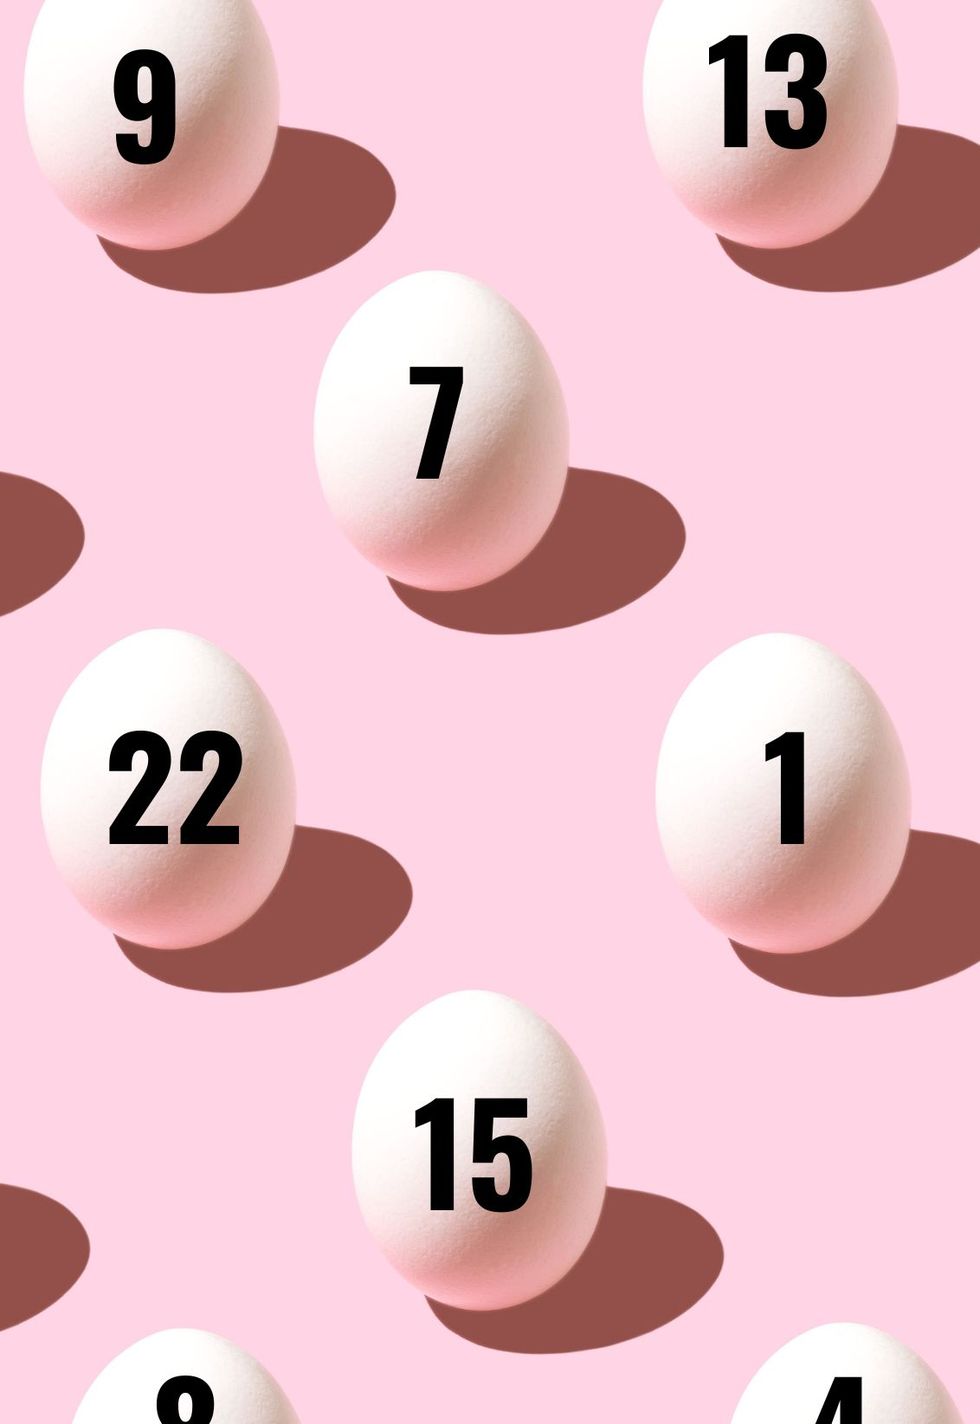 numbered eggs on a pink background for an adult easter egg hunt